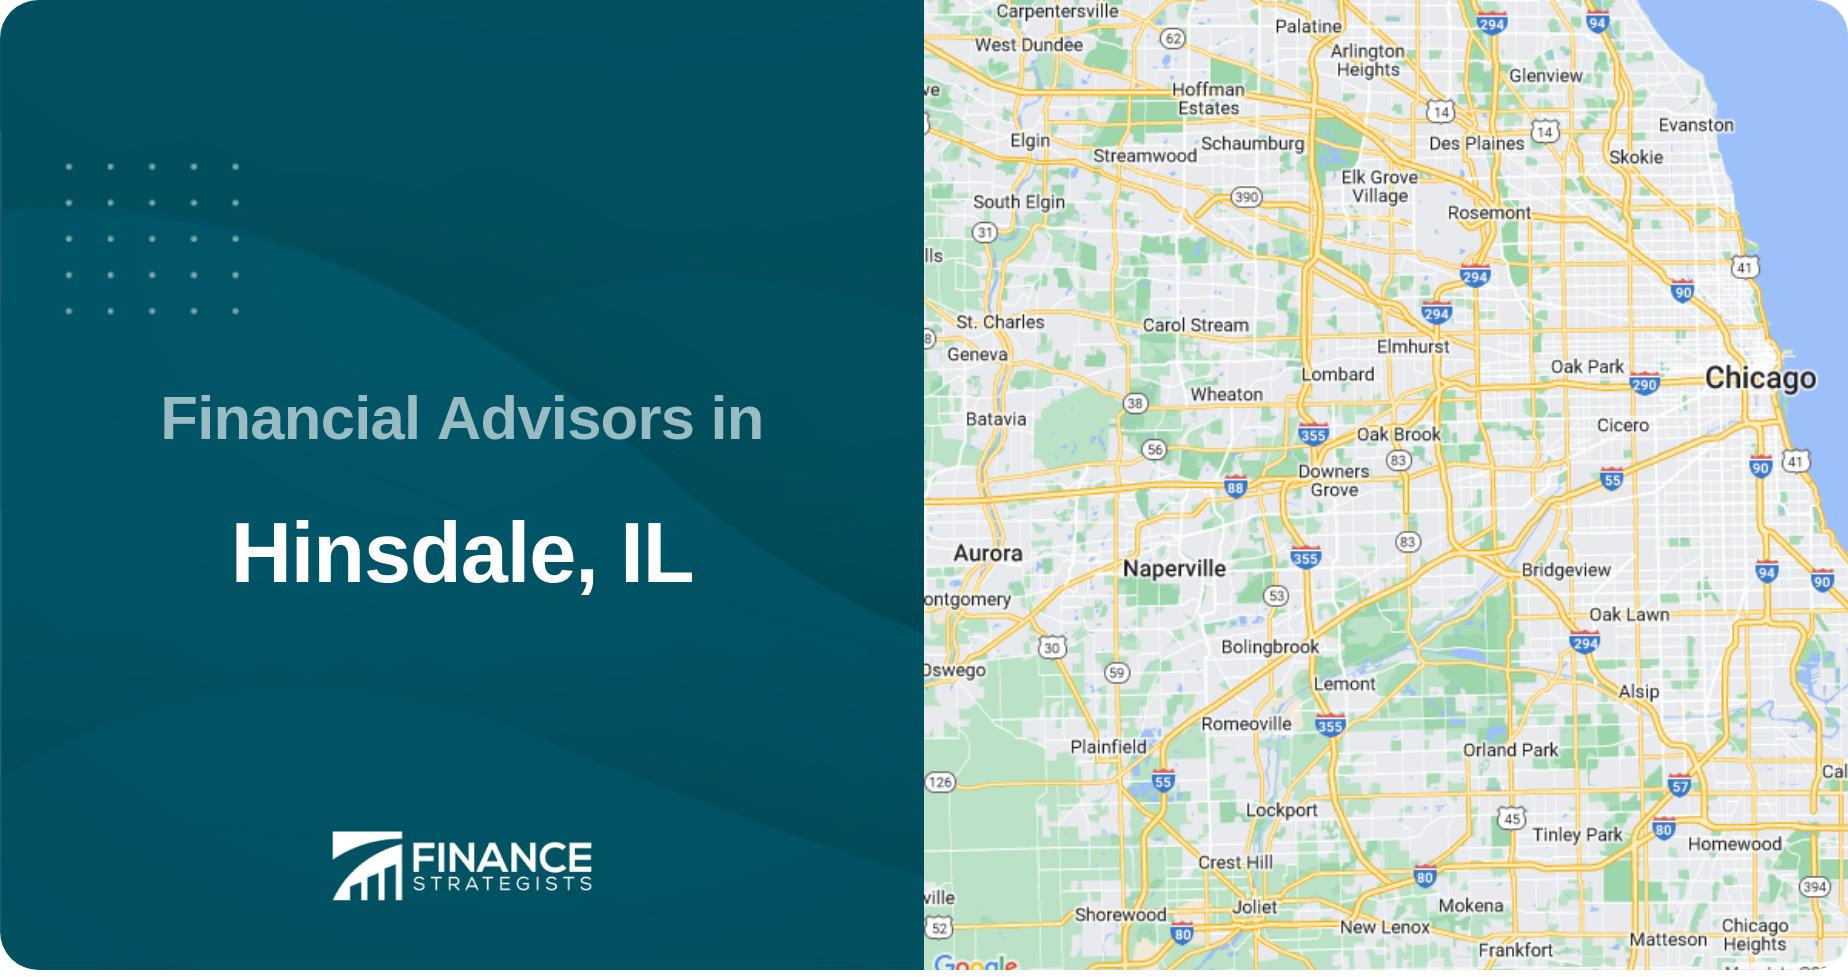 Financial Advisors in Hinsdale, IL